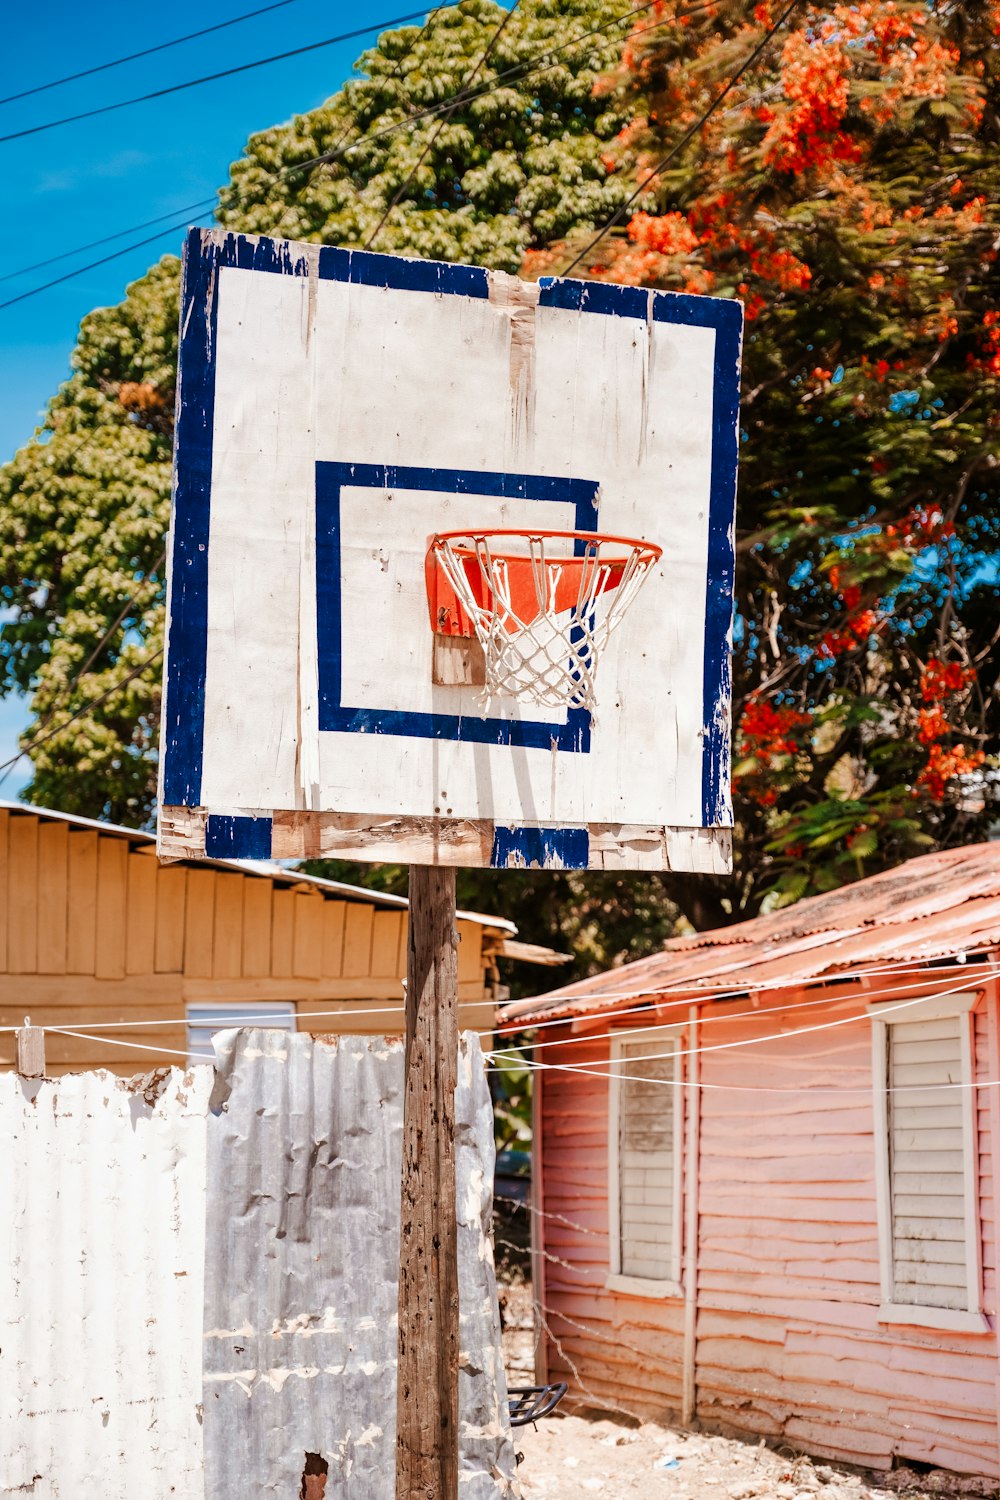 a blue and white basketball hoop sitting on top of a wooden pole